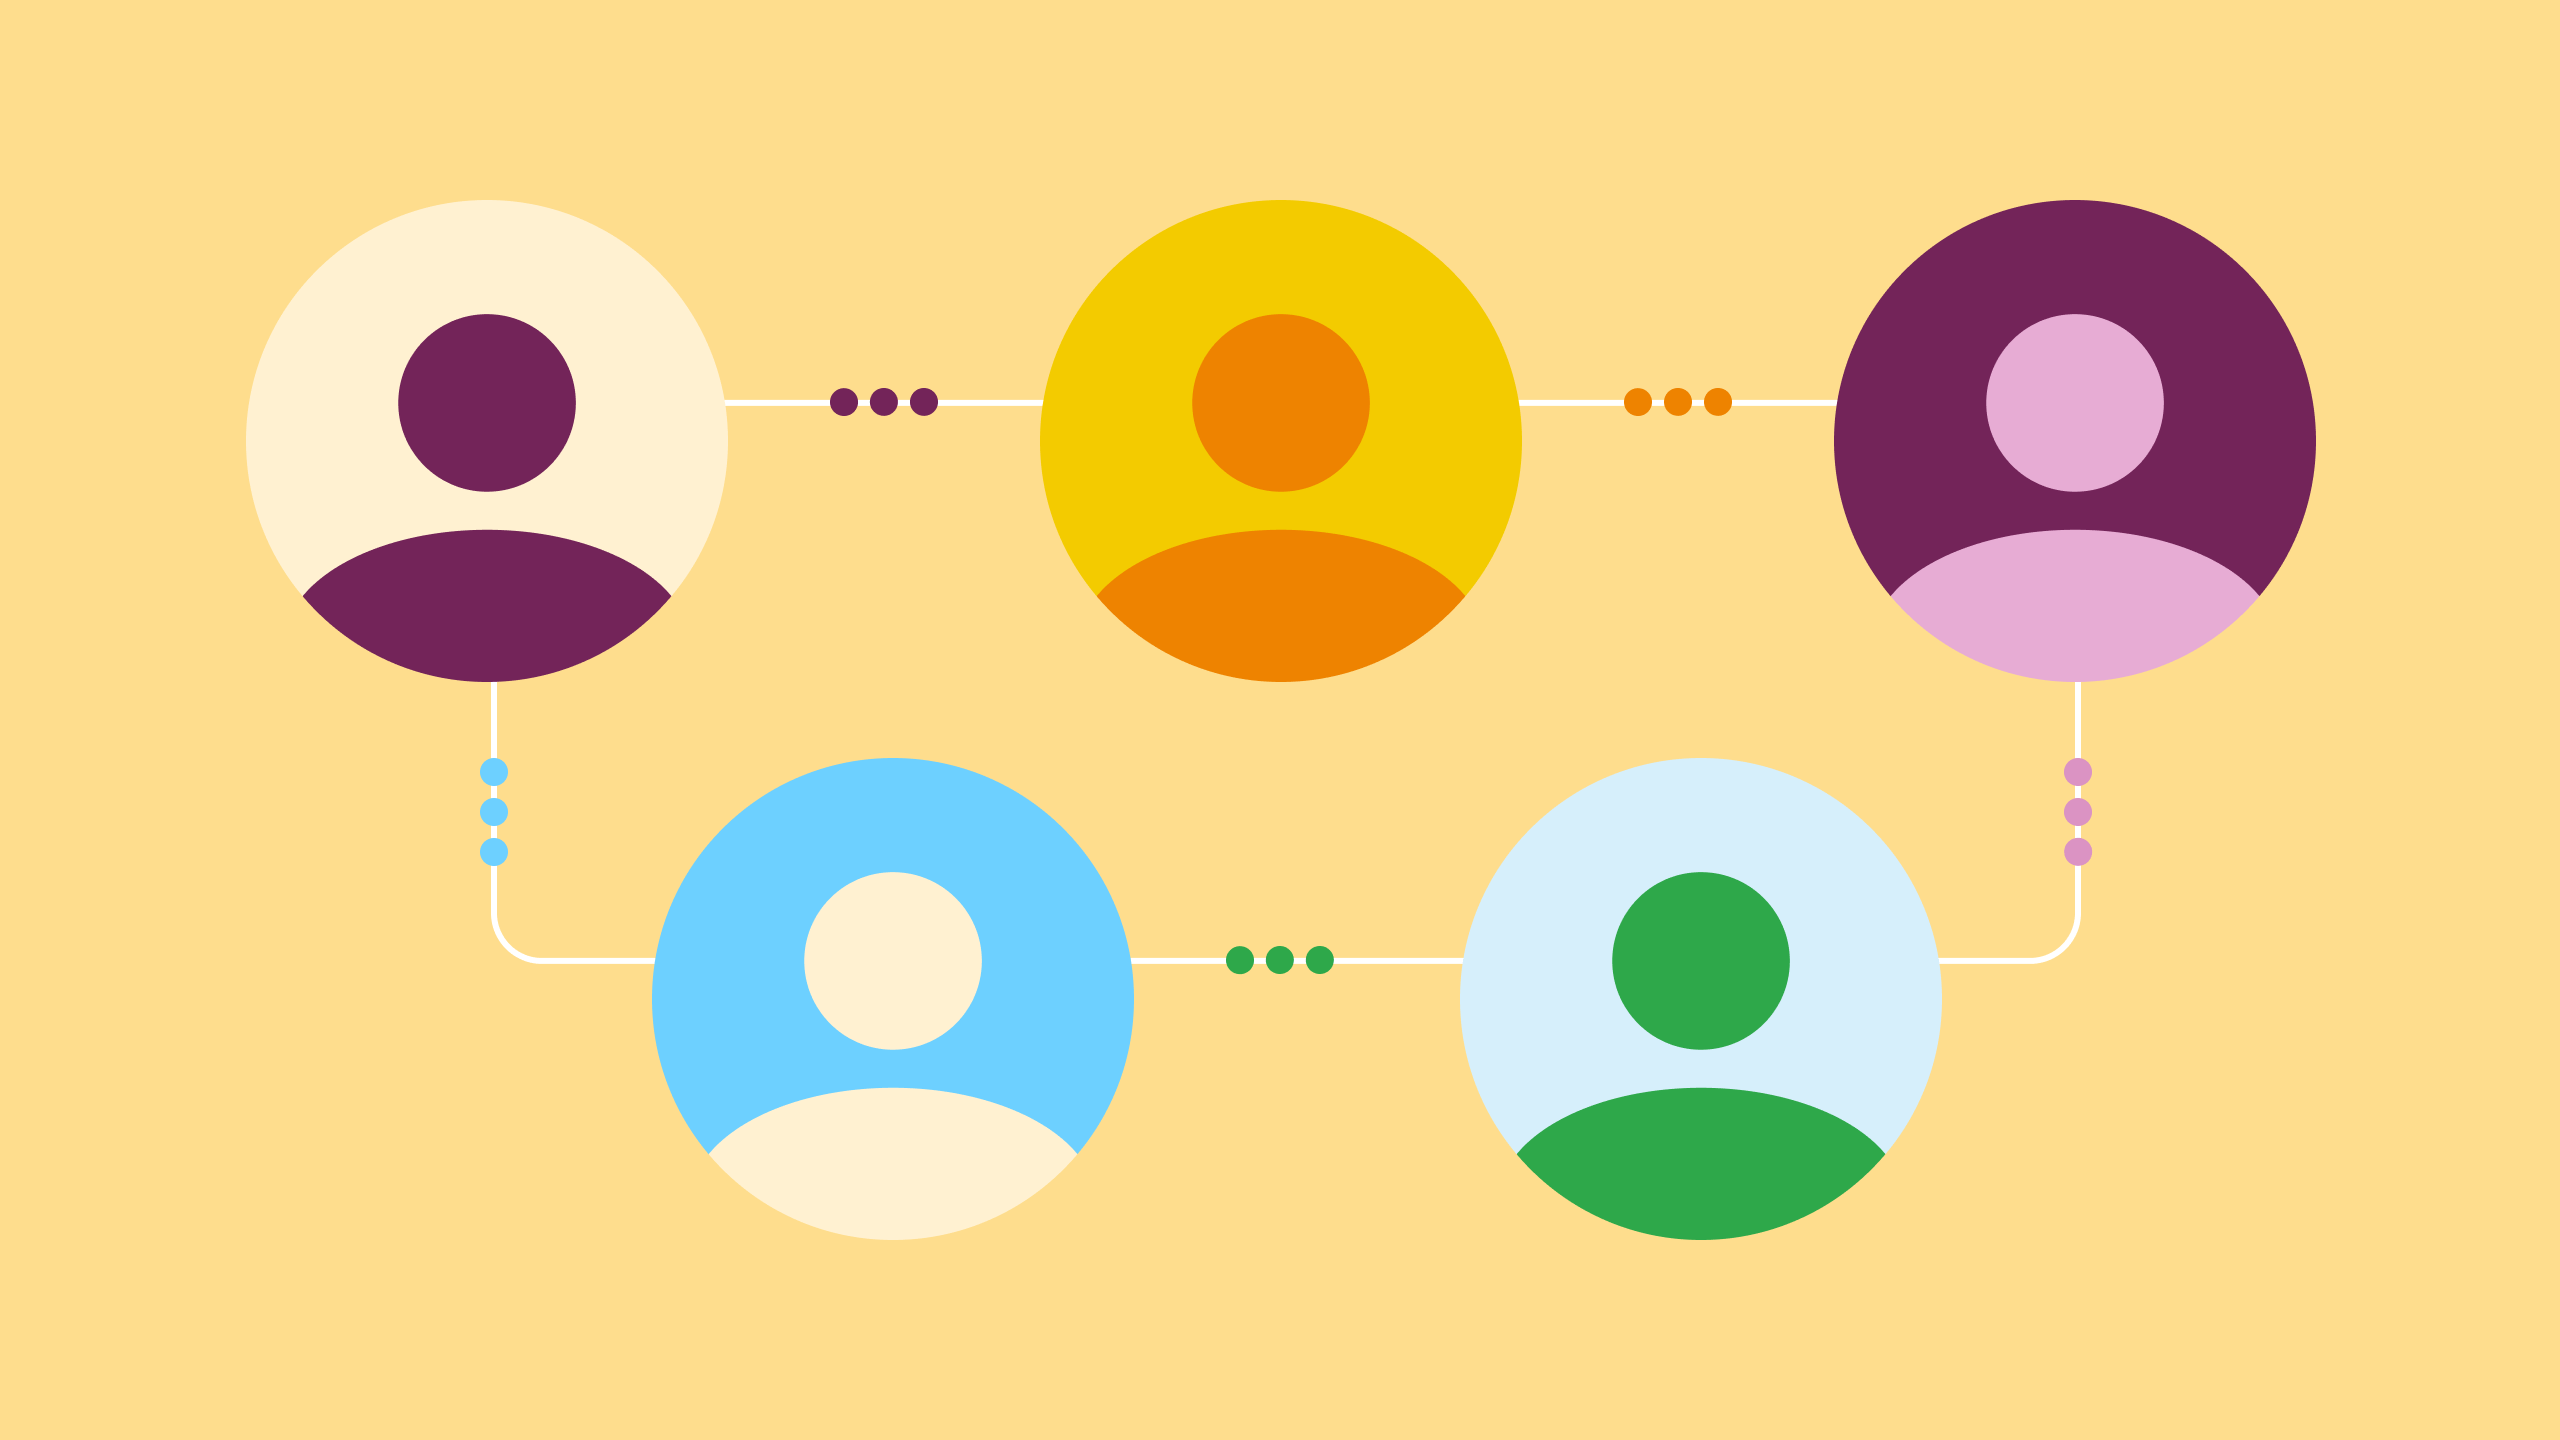 A group of interconnected users represented by different colored circles.